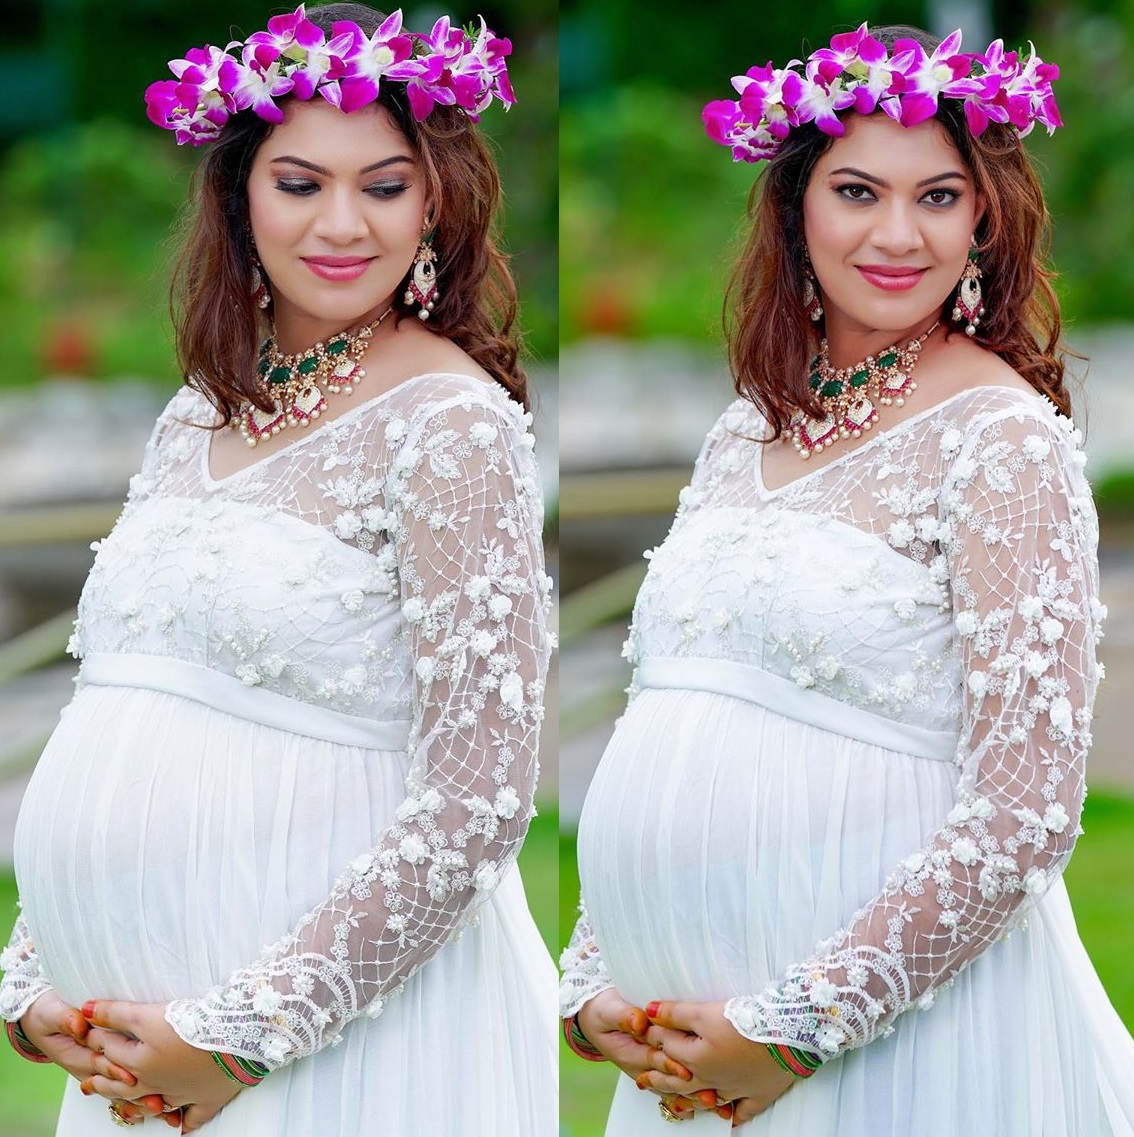 Singer geetha madhuri is pregnant with first child and recently as per trad...